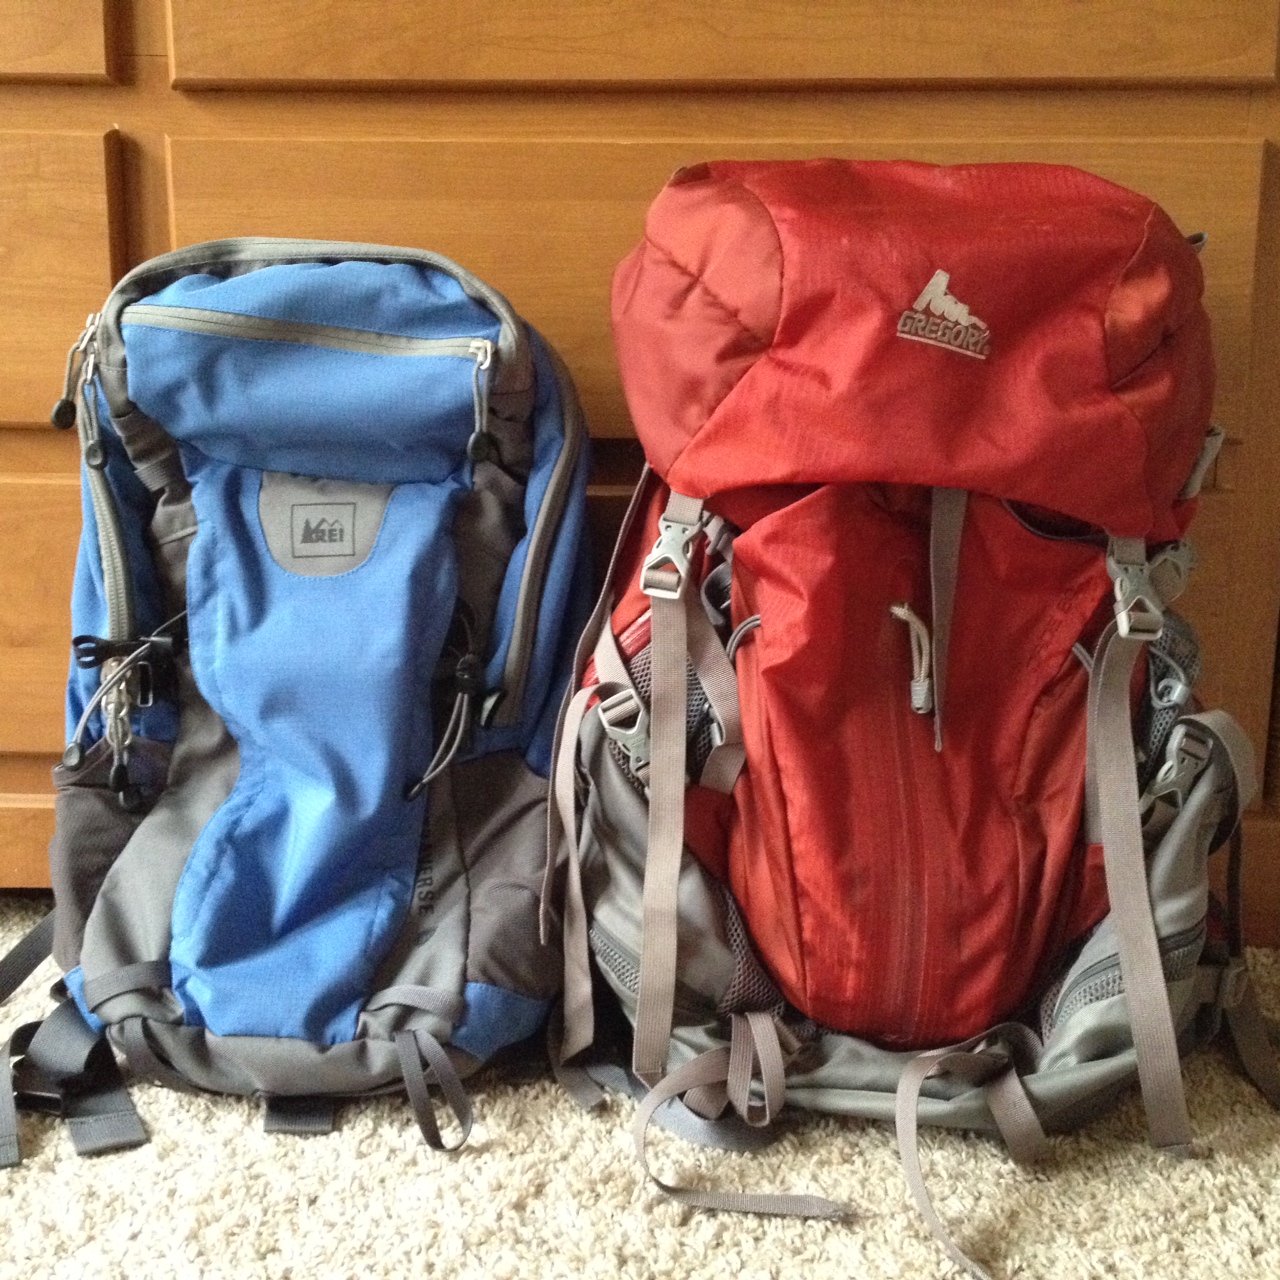 Packing list for Europe with just a 30L backpack #travel #backpackers | bluesyemre